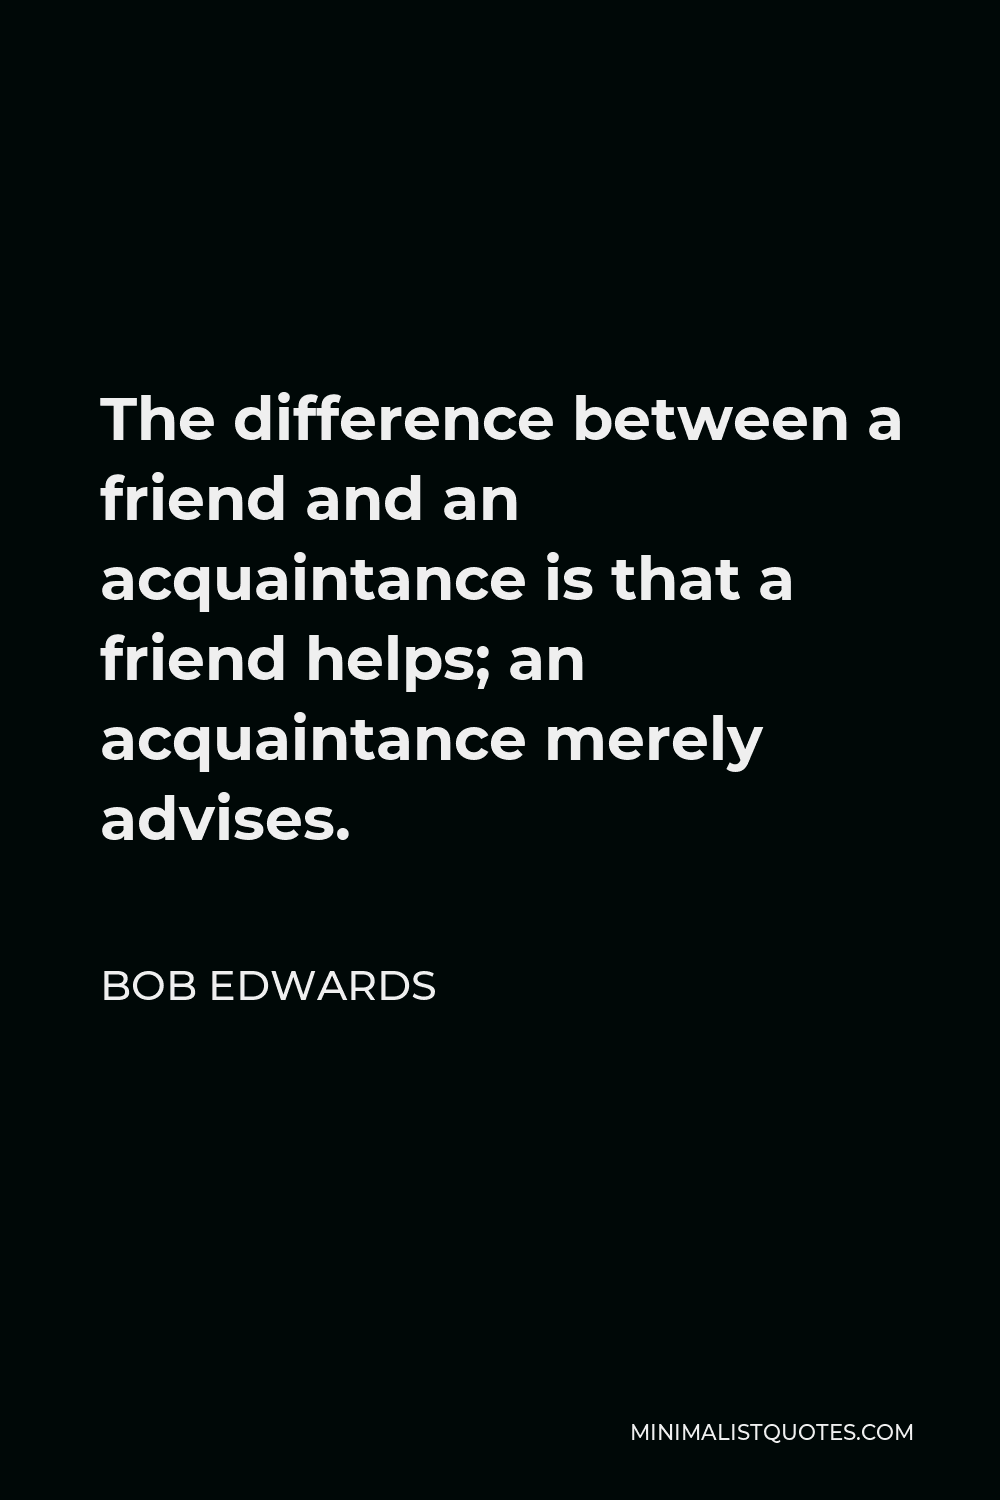 Bob Edwards Quote - The difference between a friend and an acquaintance is that a friend helps; an acquaintance merely advises.